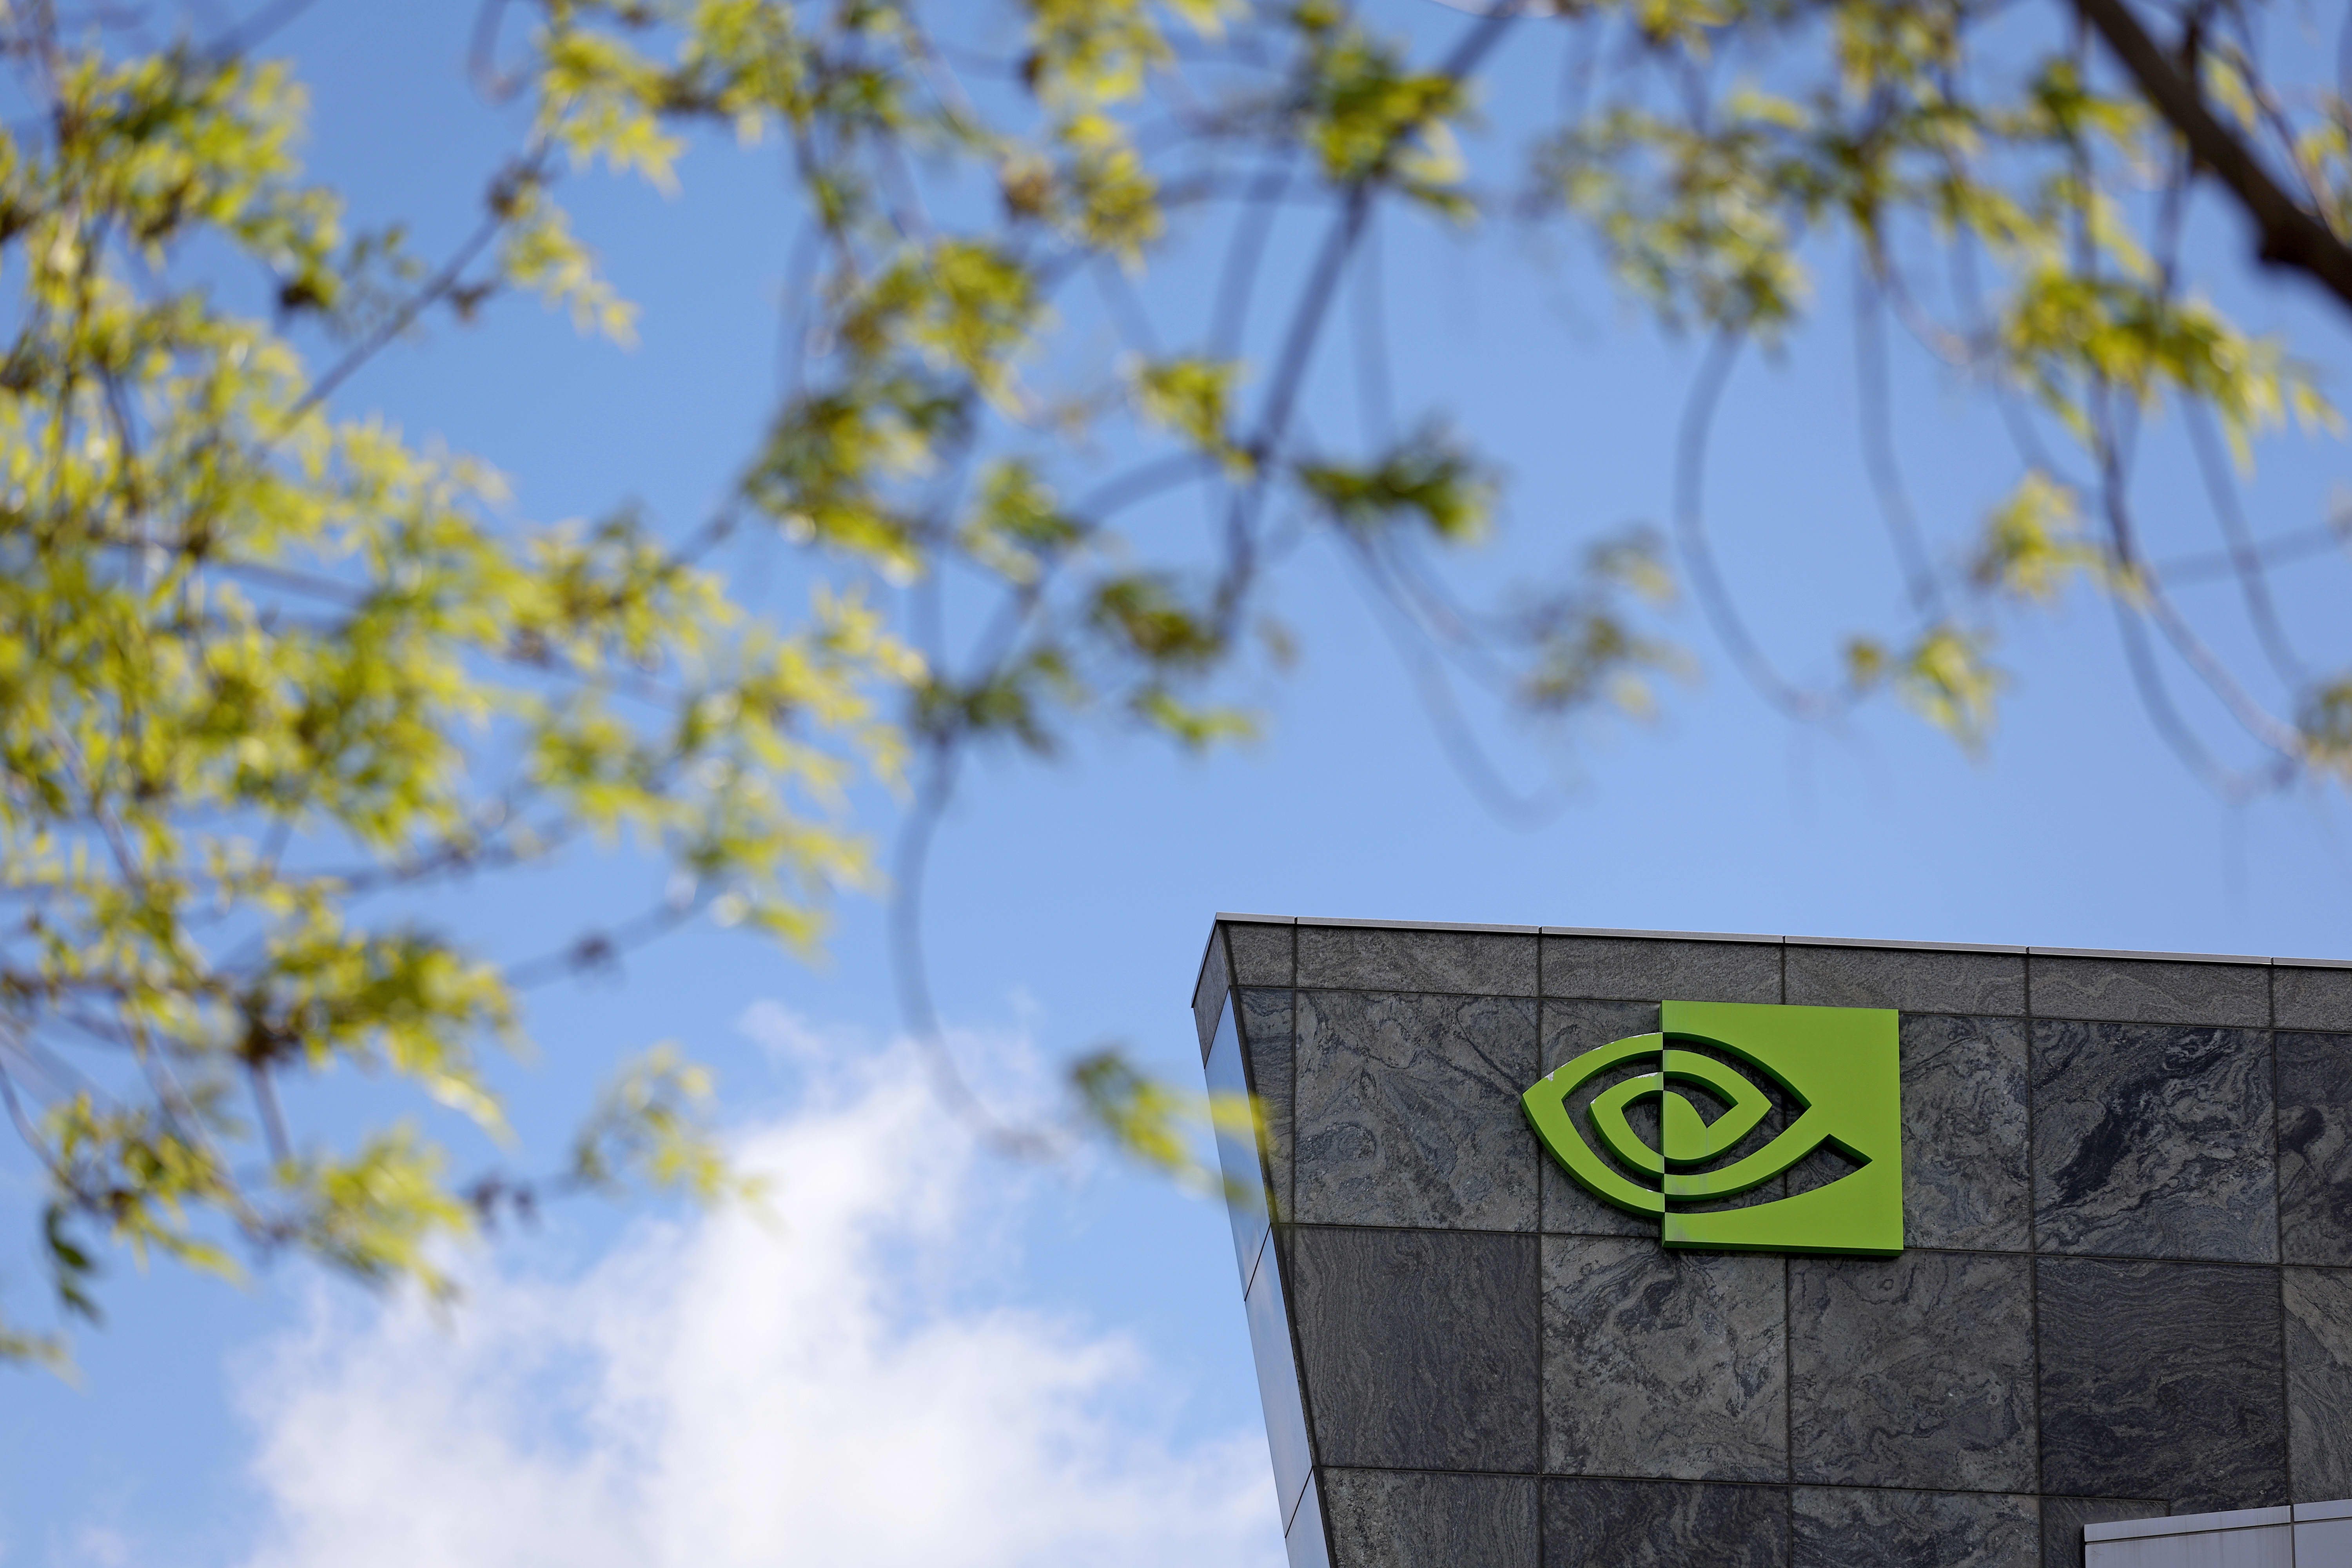 Nvidia is poised to pull away from peers ahead of semiconductor earnings this week, KeyBanc says